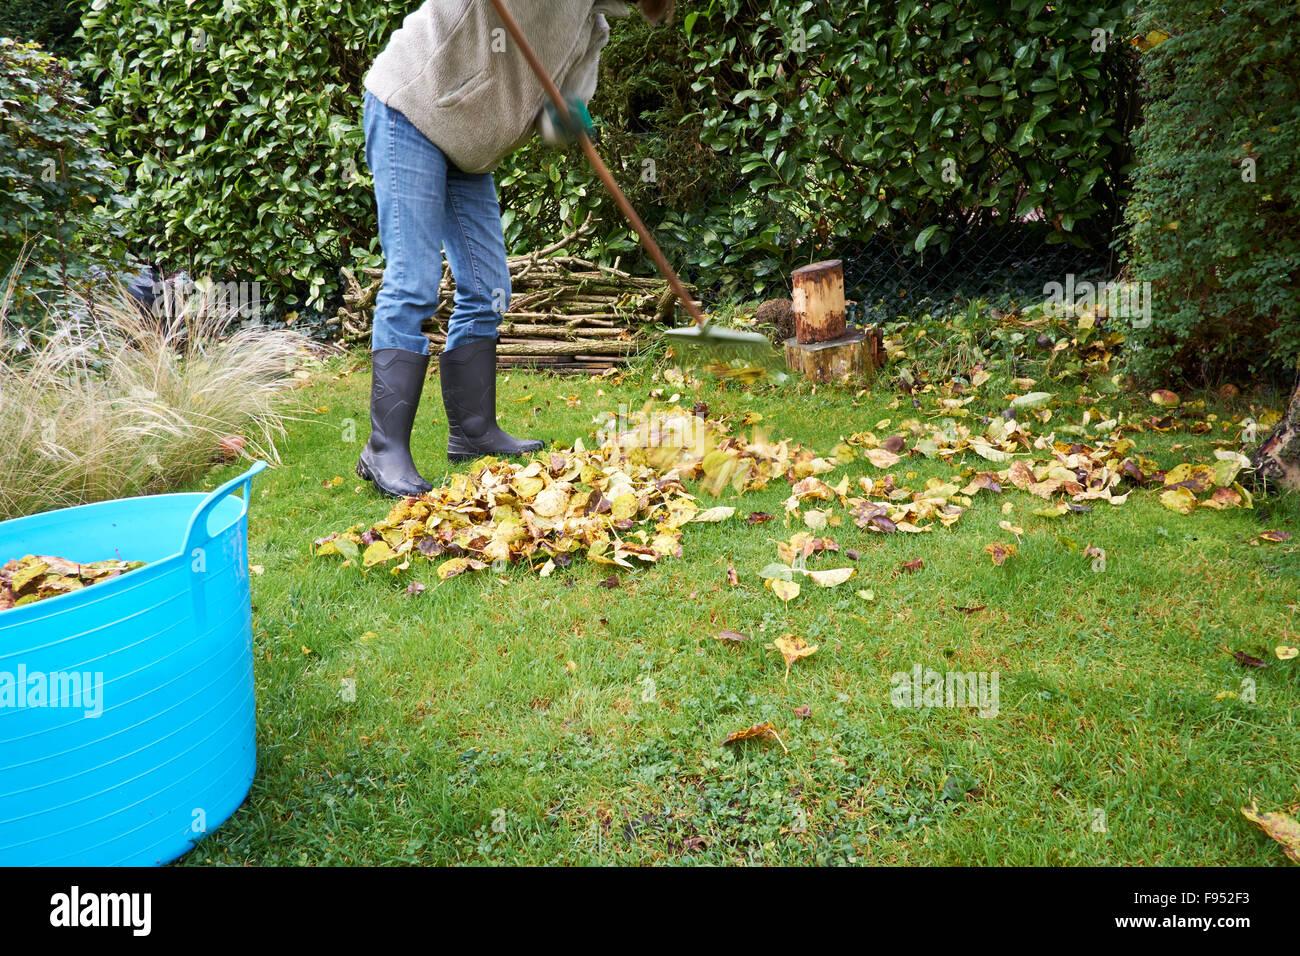 Female in a garden gathering fallen Autumn leaves with a rake. Stock Photo